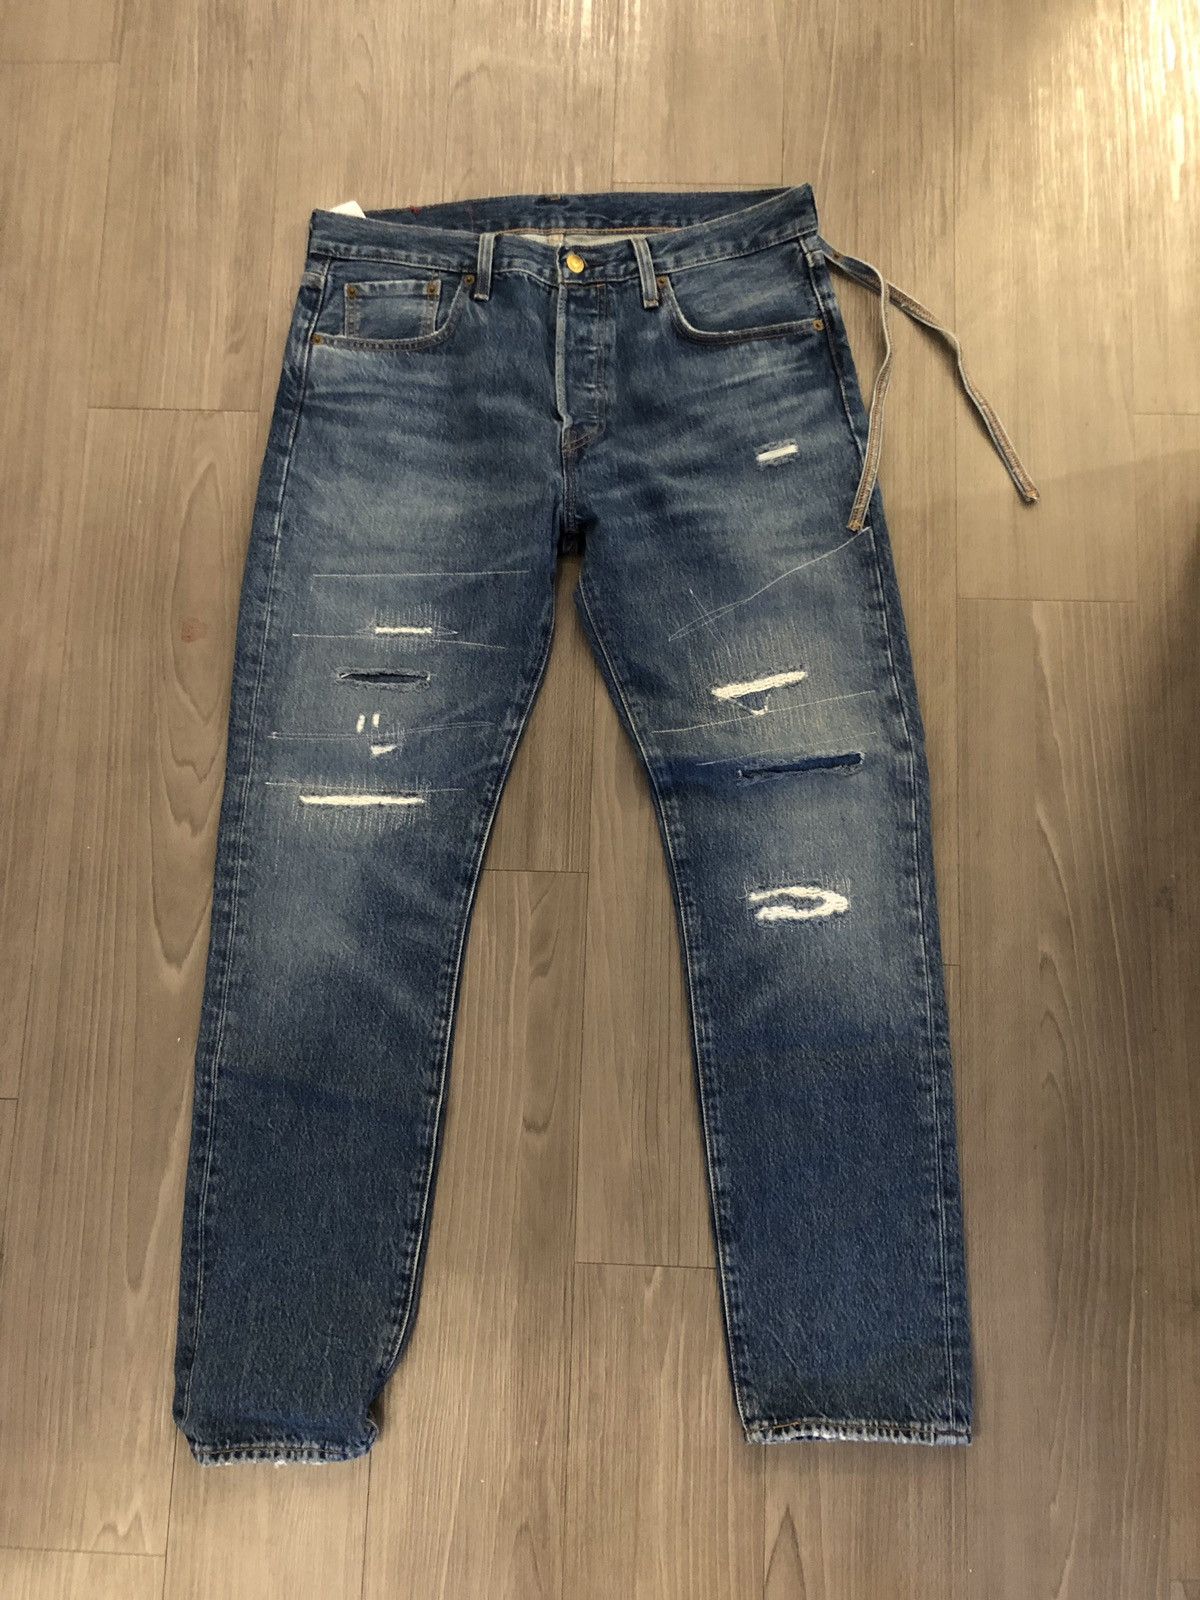 Levi's KITH X LEVI'S STRAWBERRY FIELDS 501 WASHED BLUE | Grailed